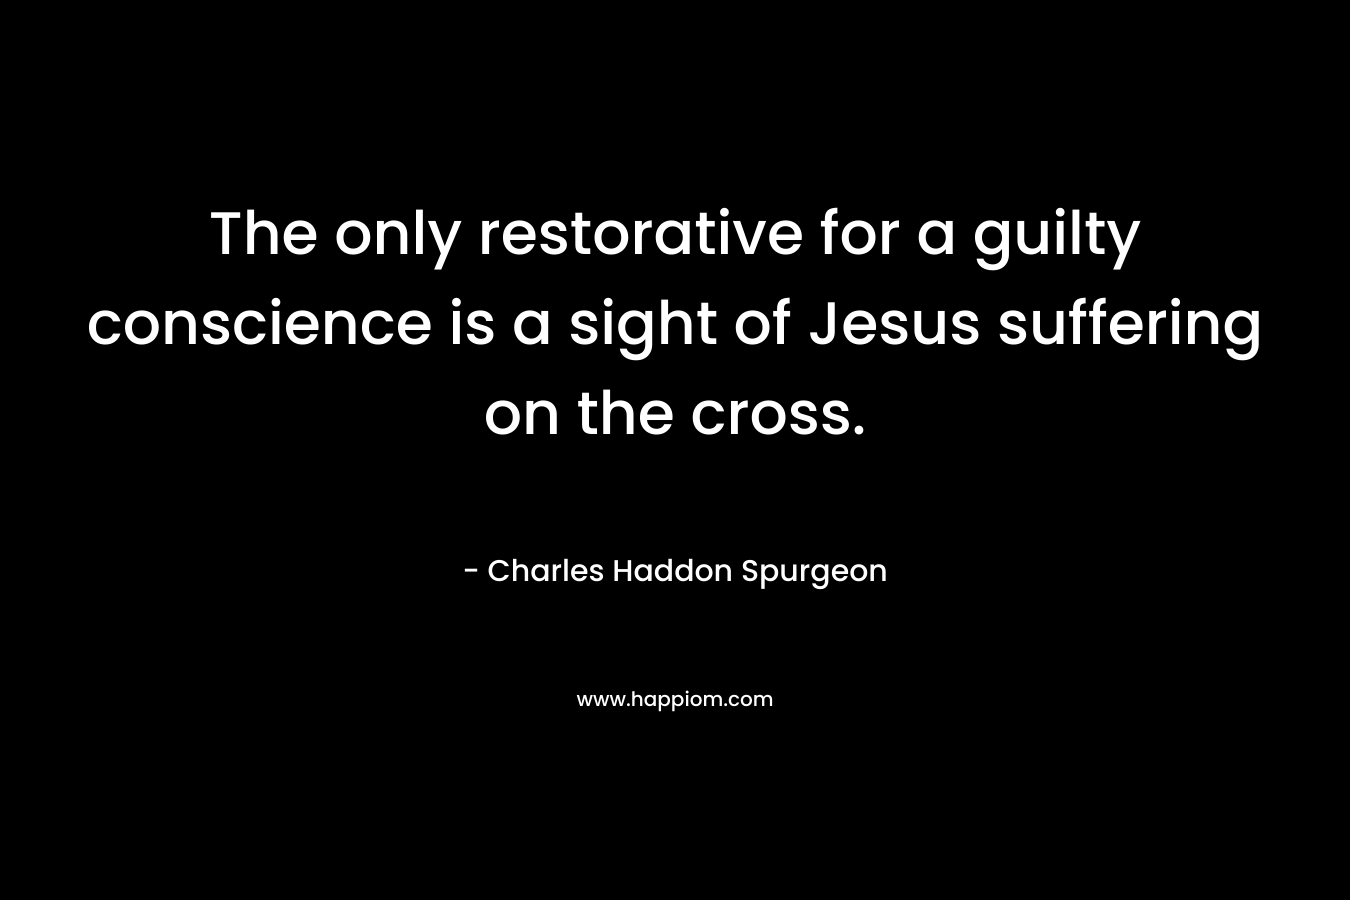 The only restorative for a guilty conscience is a sight of Jesus suffering on the cross.